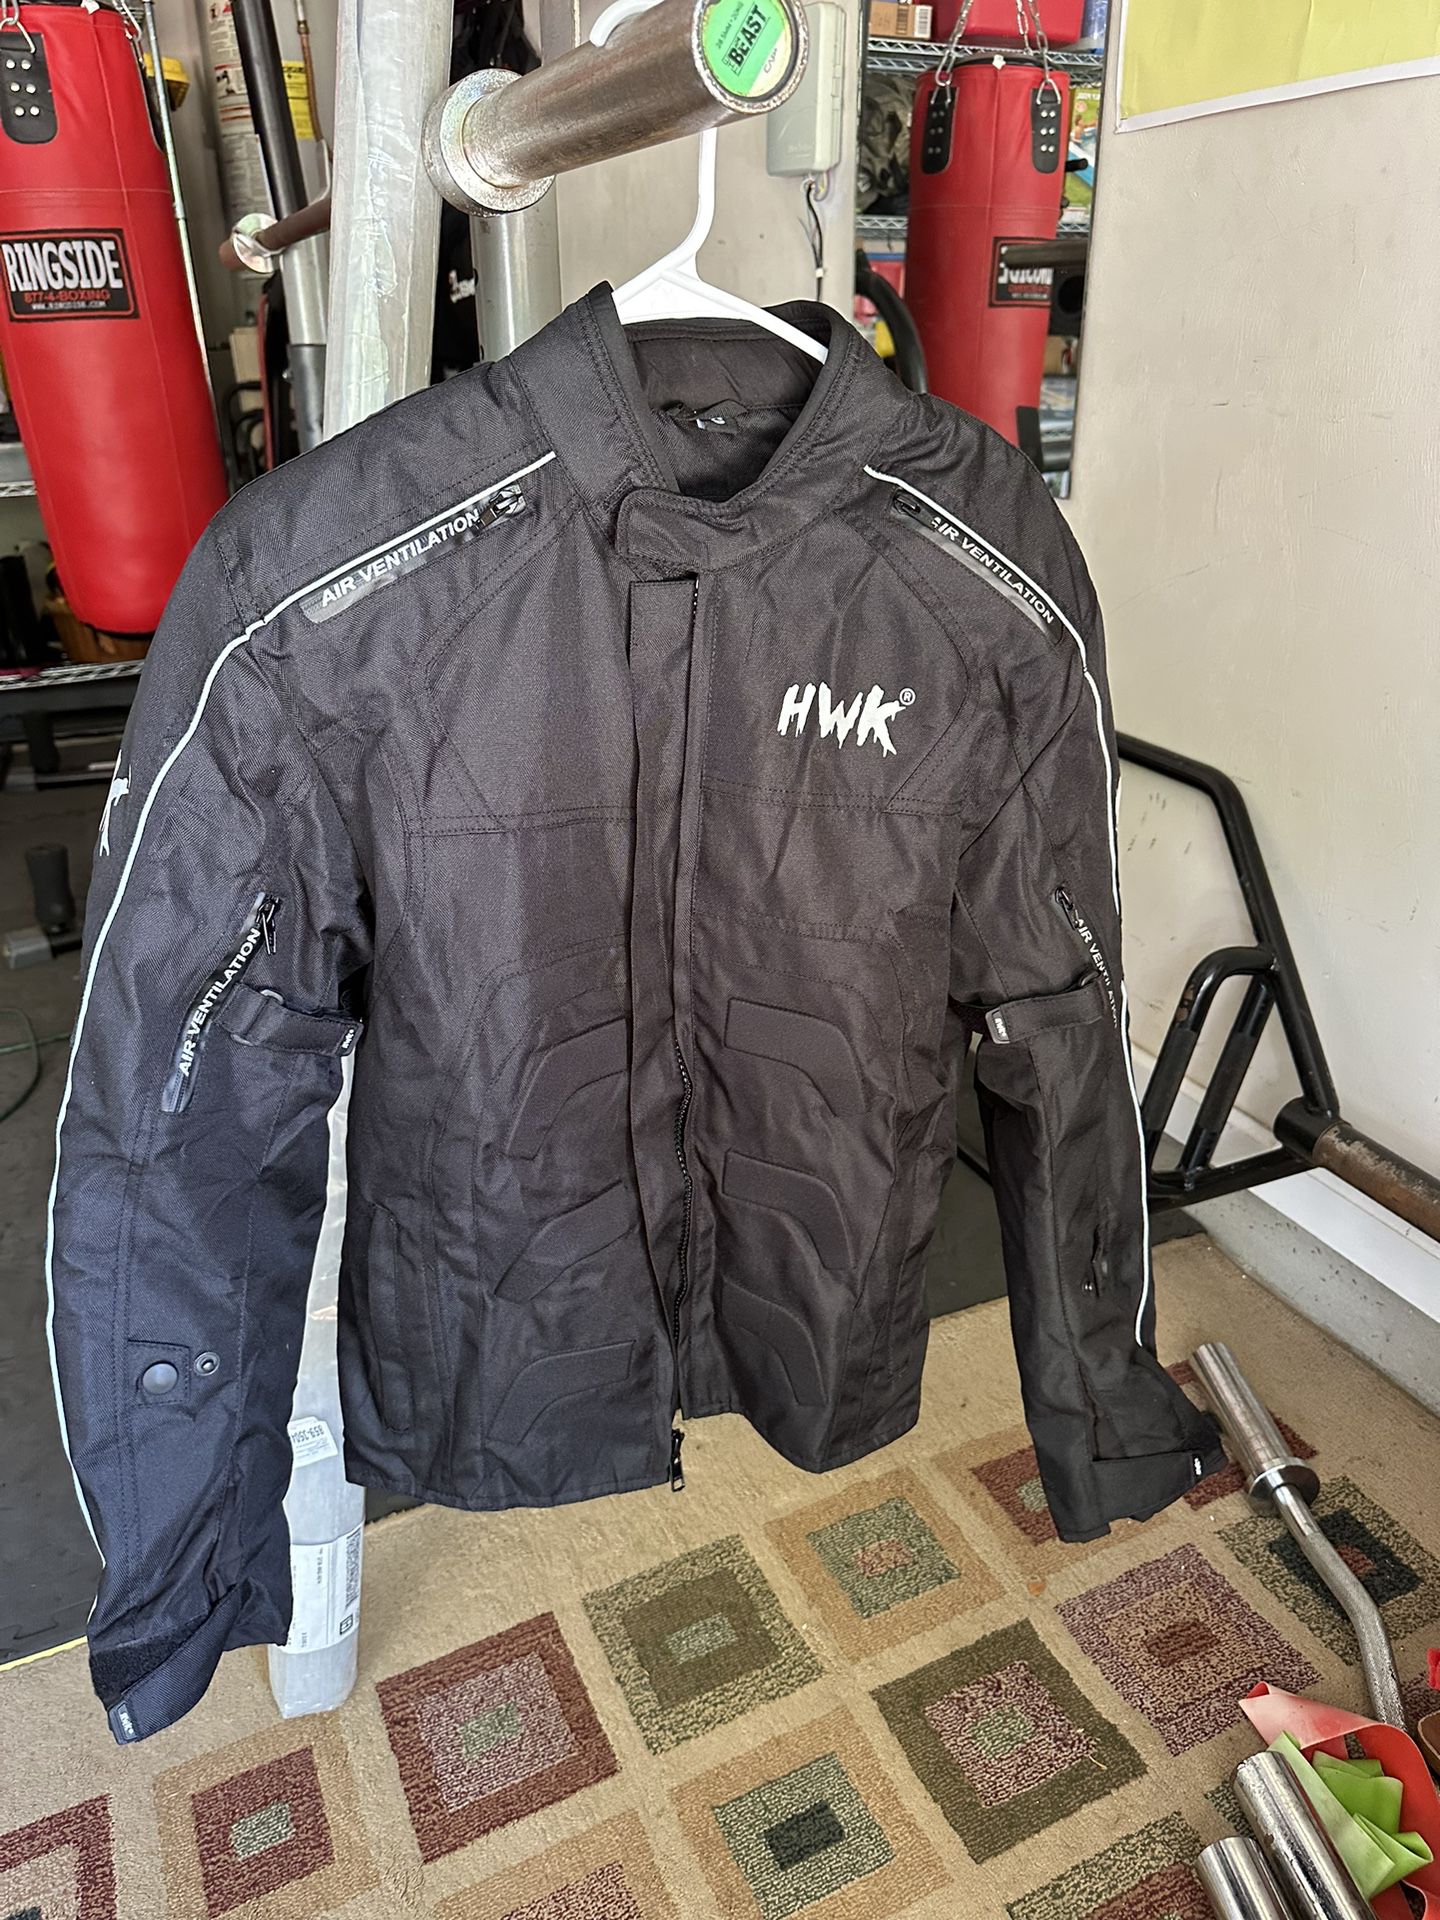 Hwk Motorcycle Jacket Spider 2.0 Size small